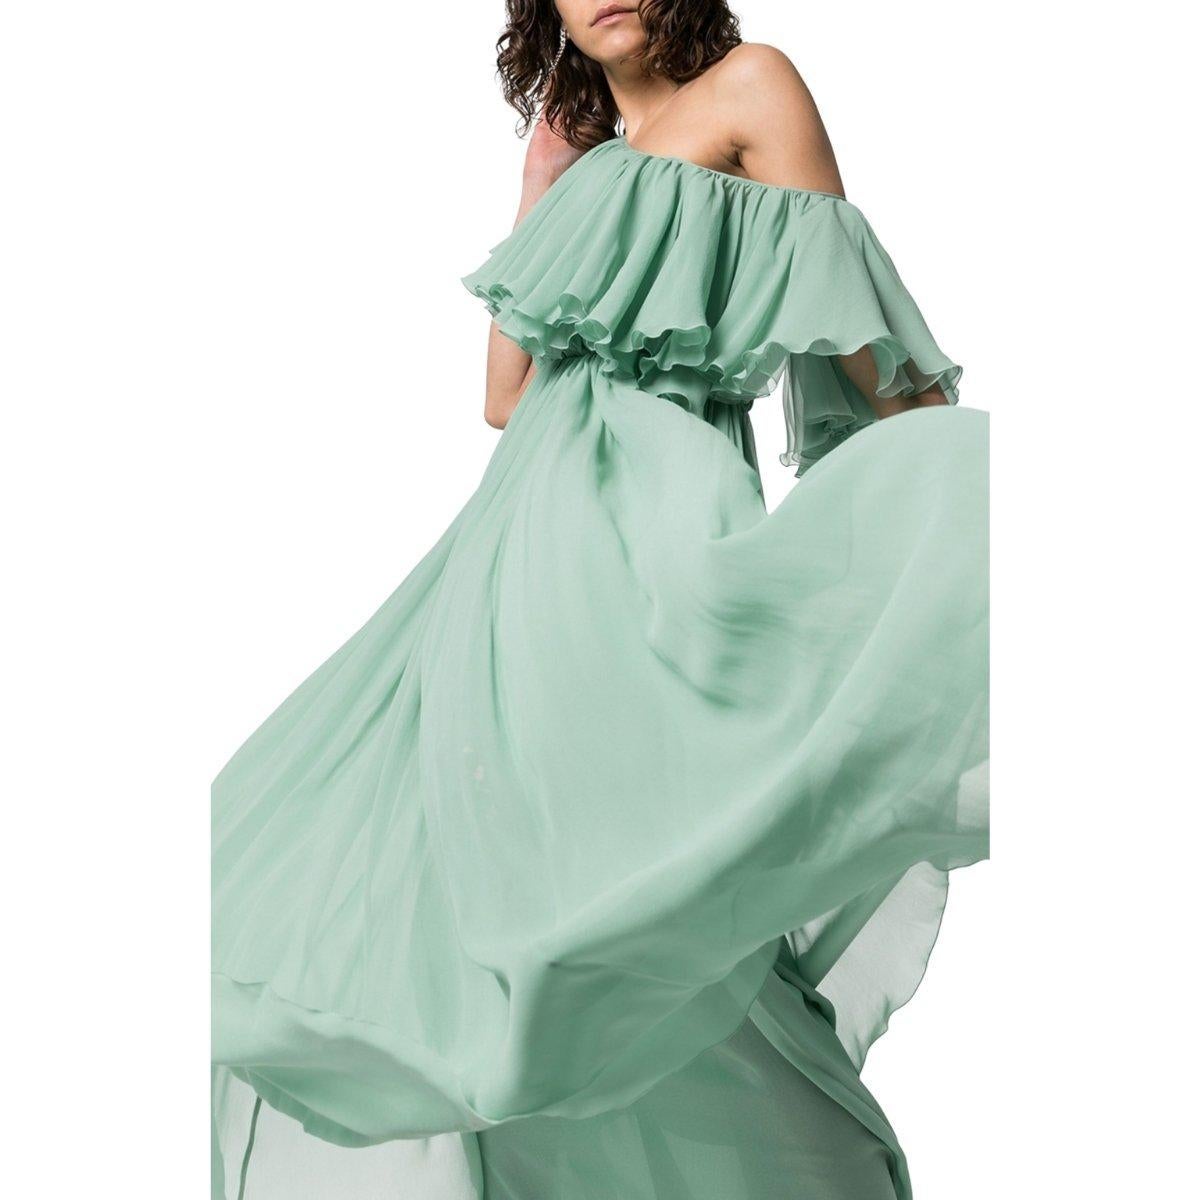 This green Giambattista Valli one shoulder ruffle silk gown
Asymmetric neck with a ruffle overlay
Tapered waist
Gathered floor-length skirt.
Composition: Silk 100%
Lining Composition: Silk 100%
Composition: Silk 100%
Dry Clean
Made in Italy